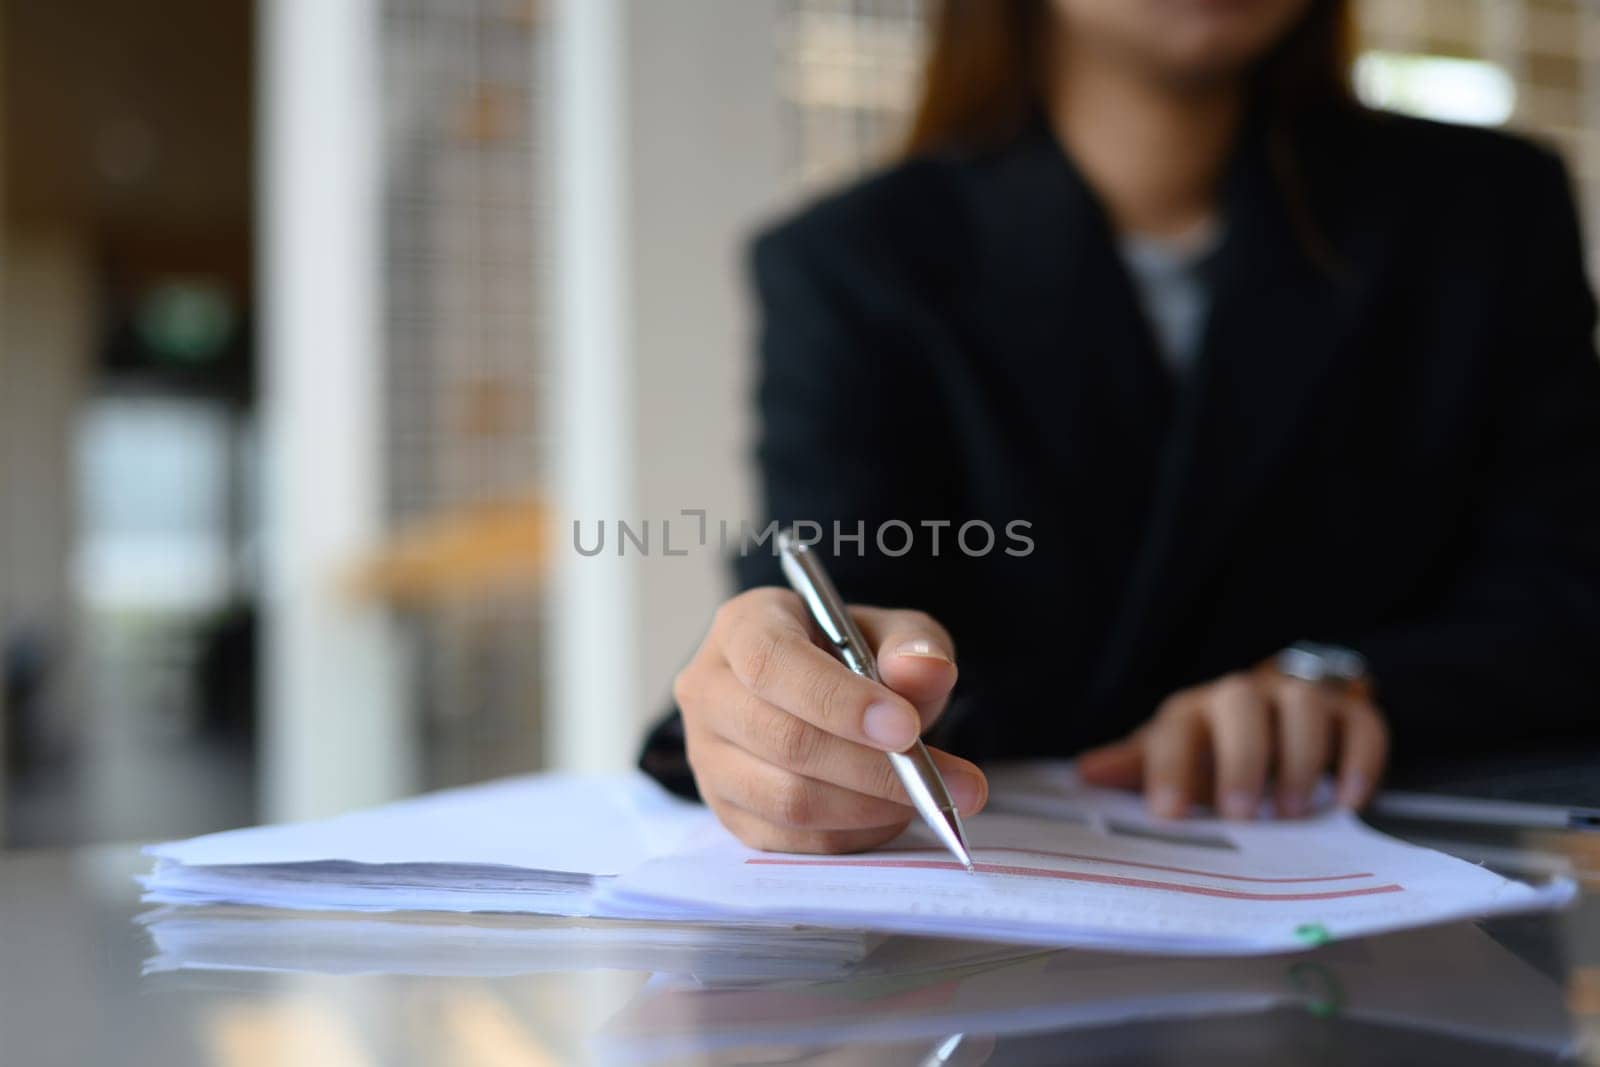 Focused on businesswoman hand writing on paper, filling paper business document at office desk.